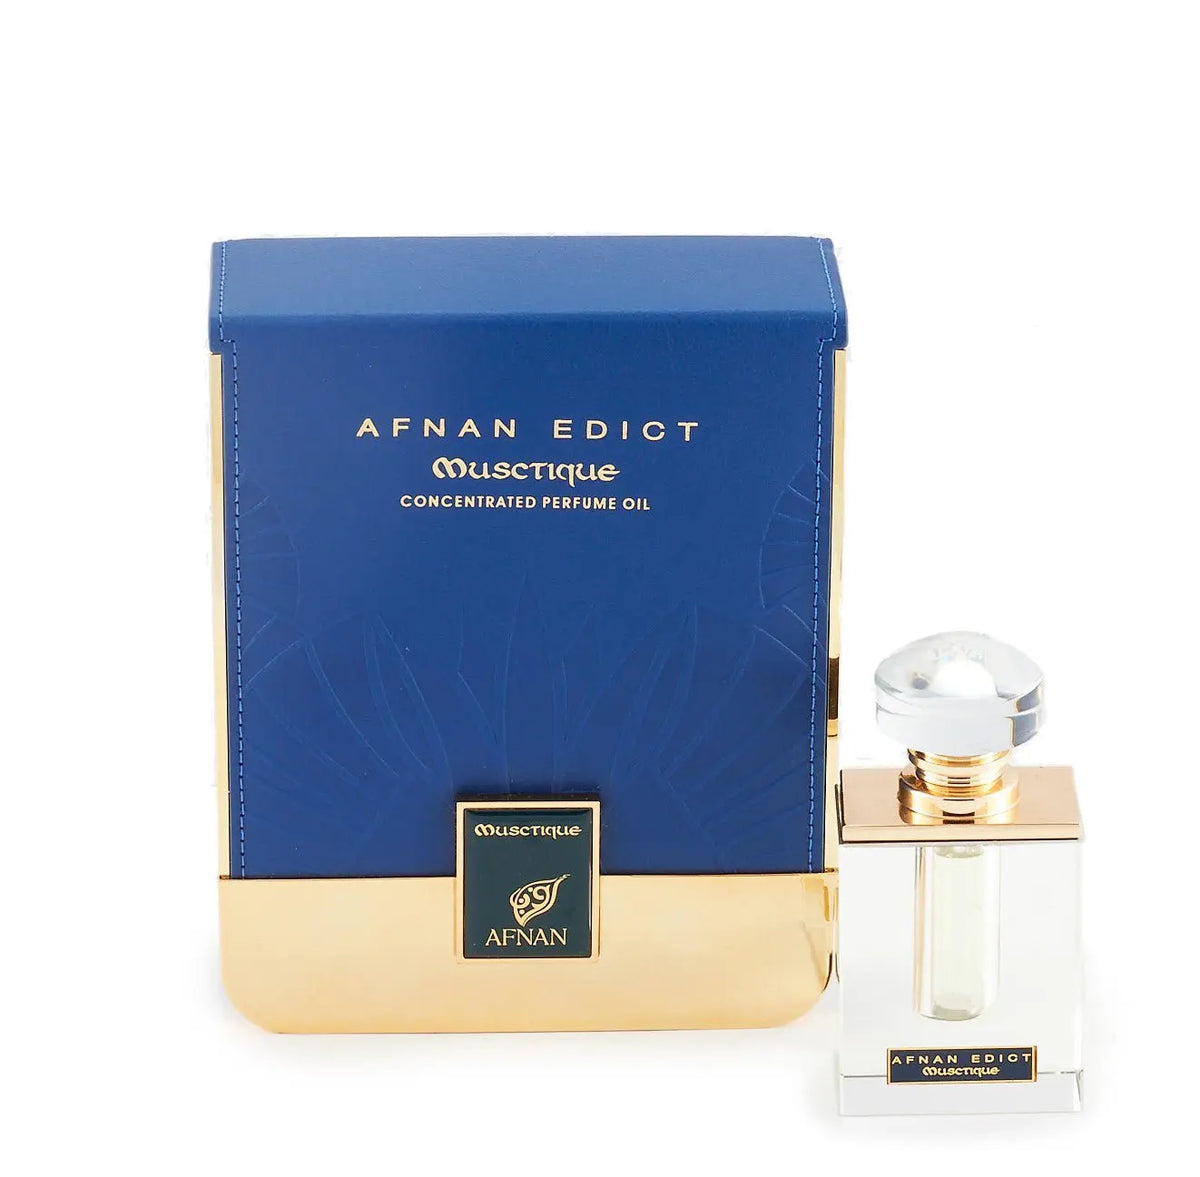 The image shows a perfume product with its packaging. The perfume bottle is clear with a square base and features a golden band around the neck, topped with a large, round, clear cap. The front label is minimalistic, with the name "AFNAN EDICT OUSCTIQUE" in a simple font. Next to the bottle is its box, which is predominantly navy blue with a textured pattern and a broad golden base.  The combination of navy blue and gold suggests a luxurious and sophisticated product.